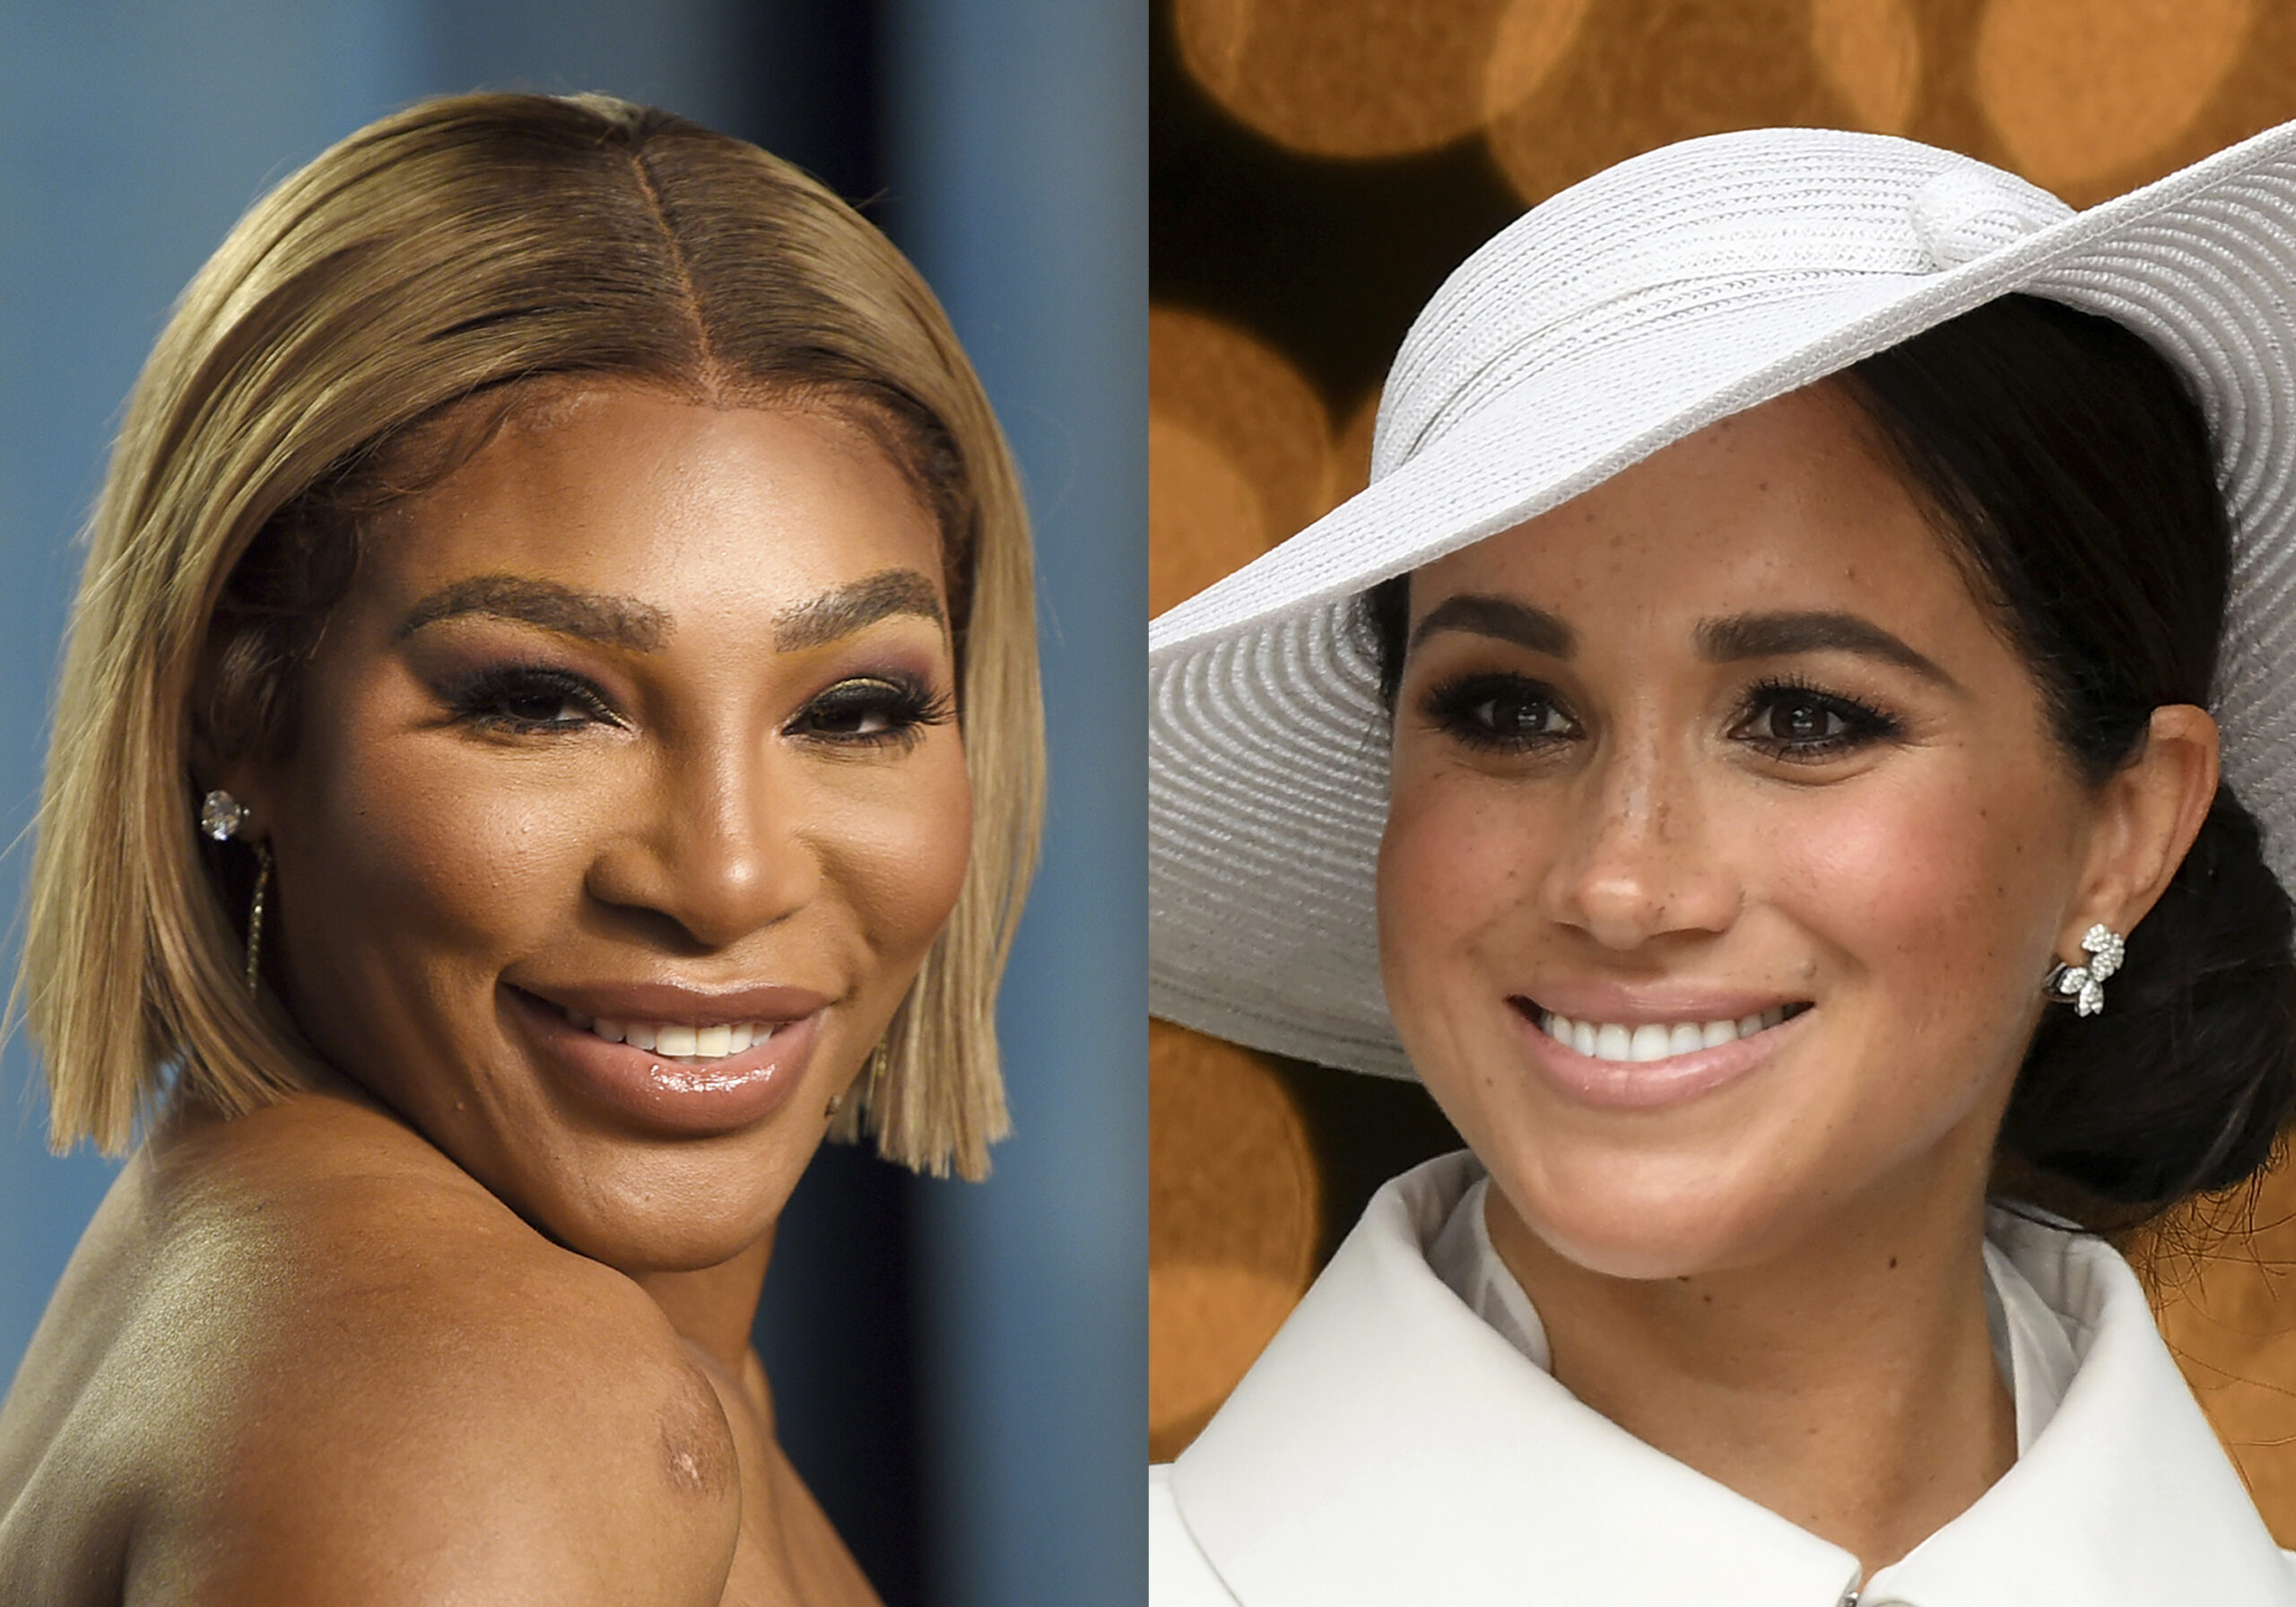 Serena Williams appears at the Vanity Fair Oscar Party in Beverly Hills, Calif., on March 27, 2022, left, and Meghan, Duchess of Sussex, appears at a service of thanksgiving for the reign of Queen Elizabeth II in London on June 3, 2022. The first episode of “Archetypes,” a podcast by Meghan, the Duchess of Sussex, features a discussion between her and Williams on motherhood. The podcast is Meghan's first release as part of an exclusive deal with Spotify. (AP Photo)